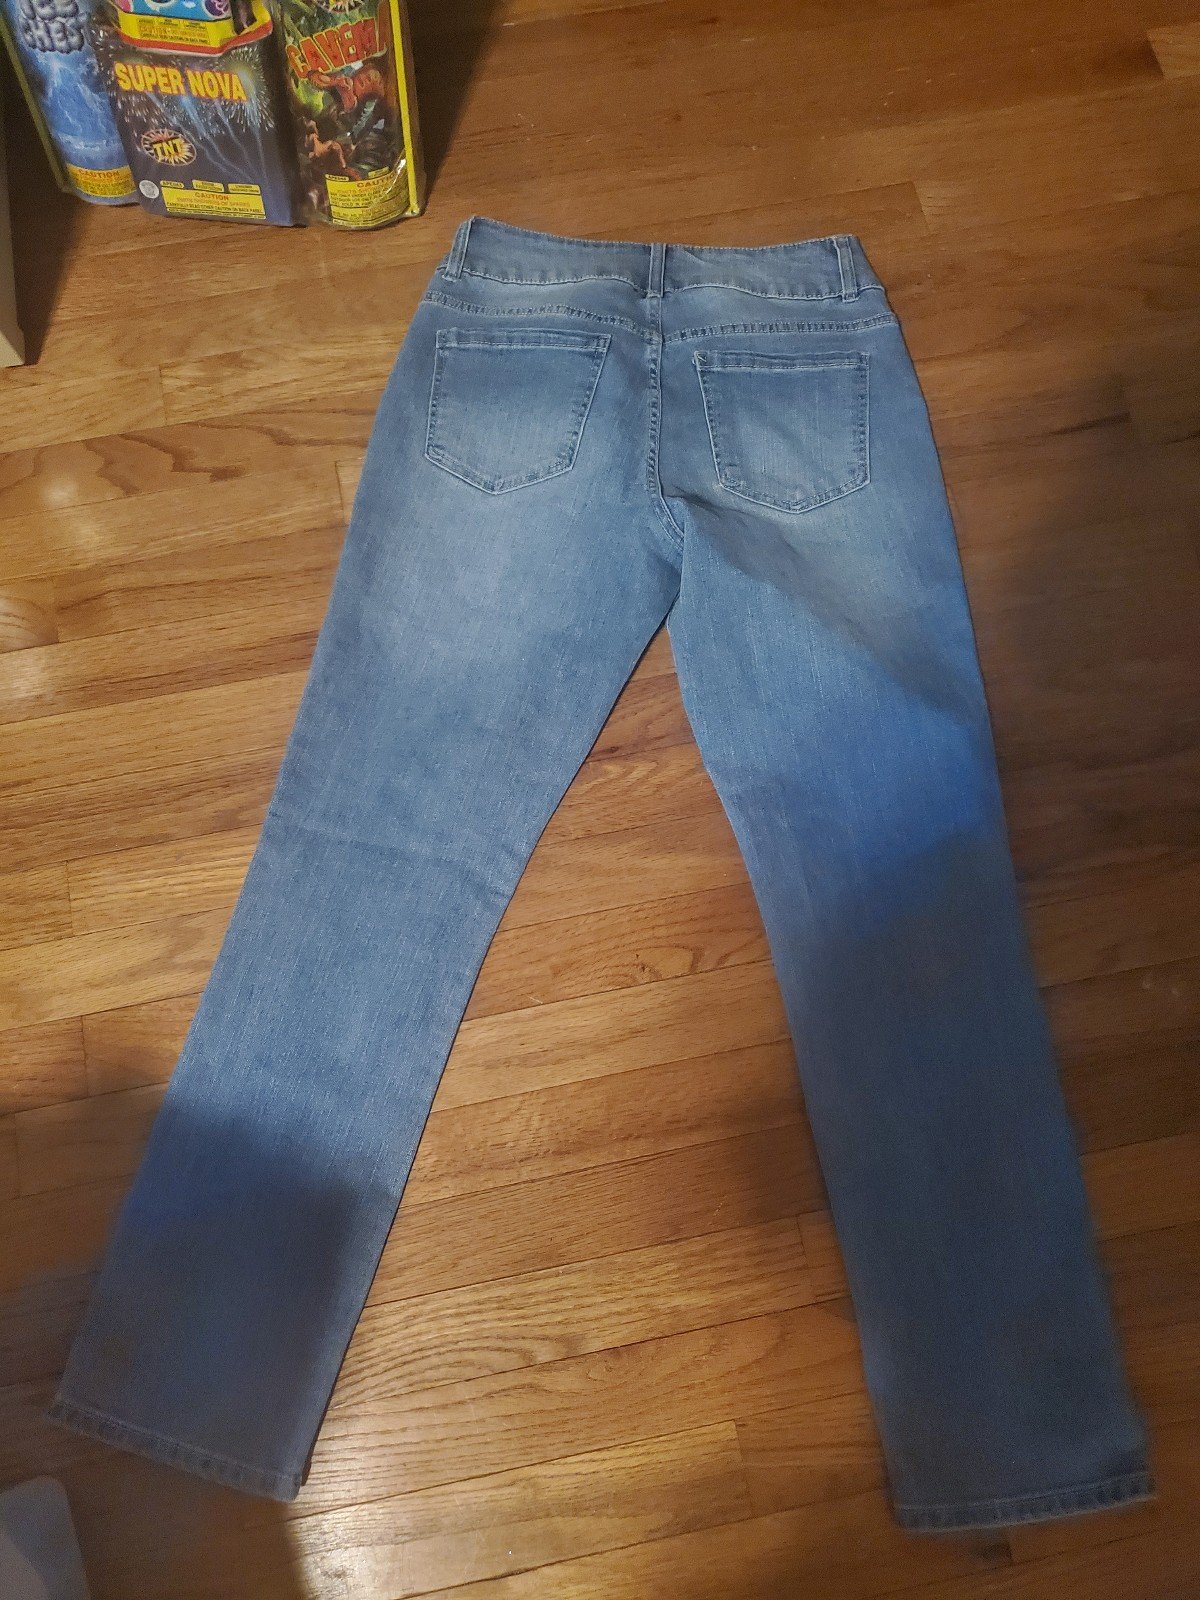 high discount Size 6 jeans iI5XOFv4M on sale